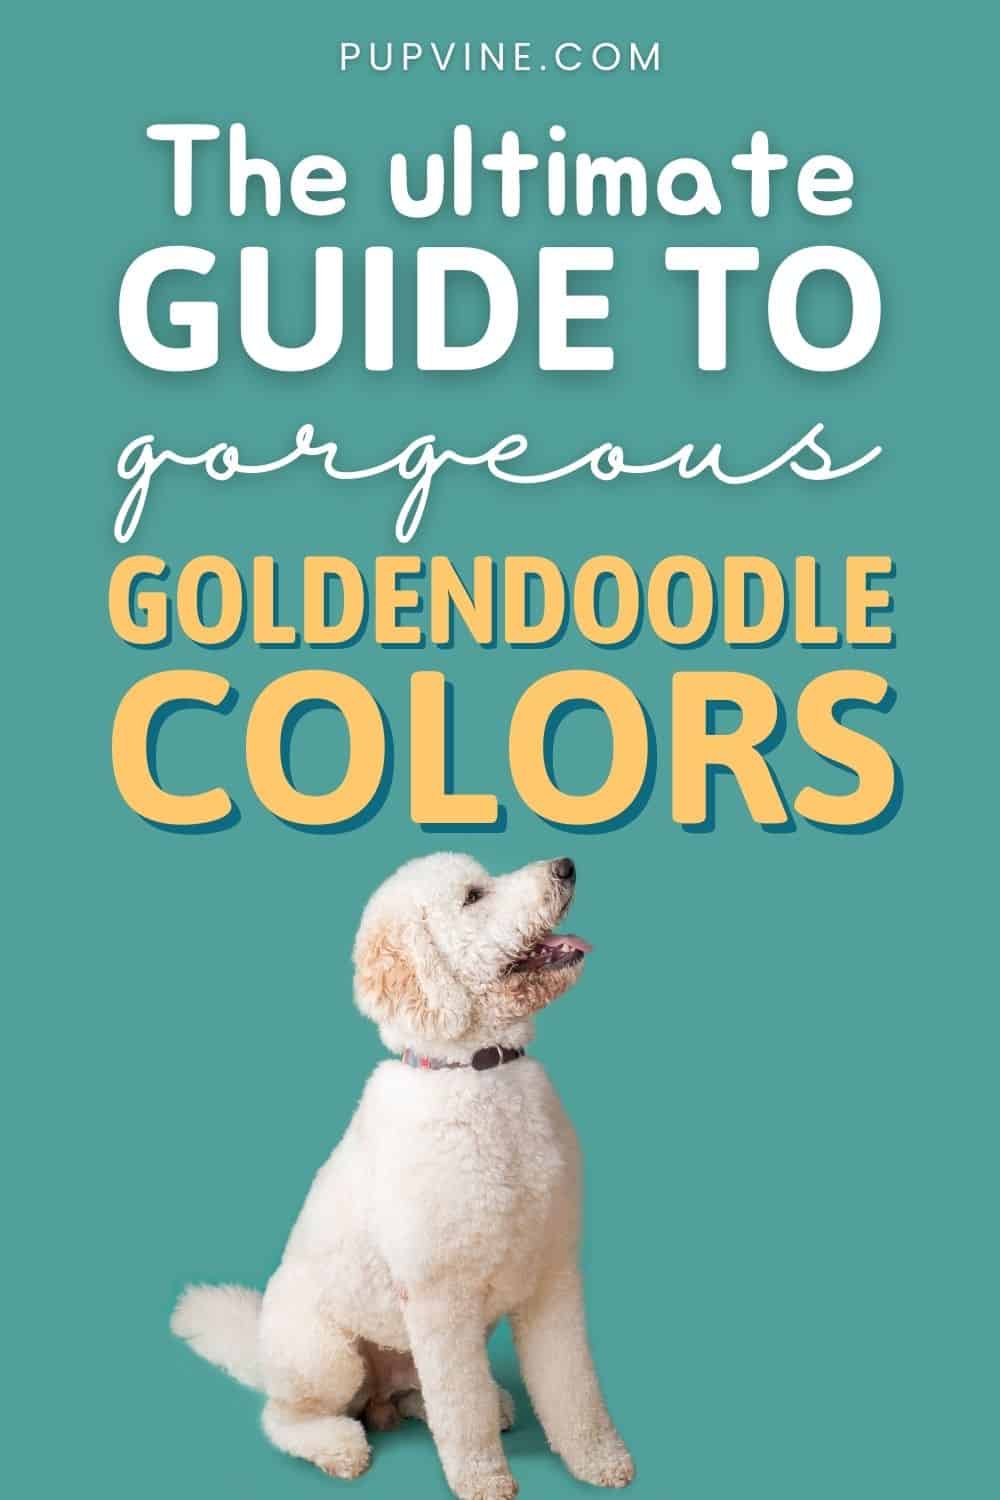 The Ultimate Guide To Gorgeous Goldendoodle Colors